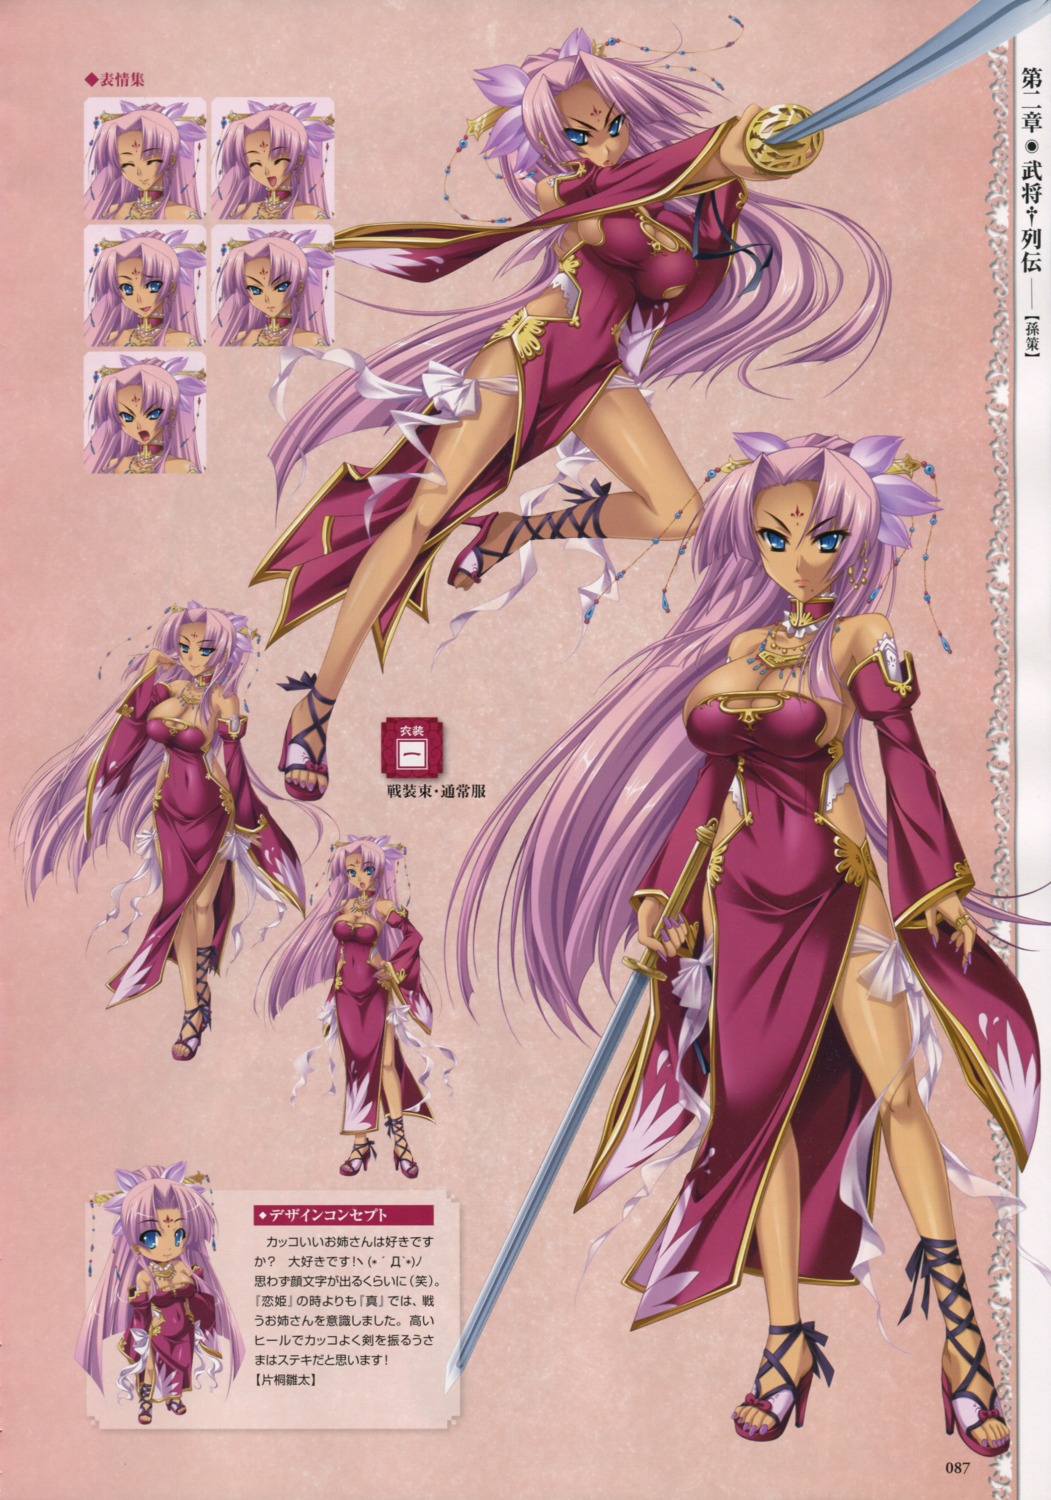 asian_clothes baseson character_design chibi cleavage expression heels koihime_musou sonsaku sword